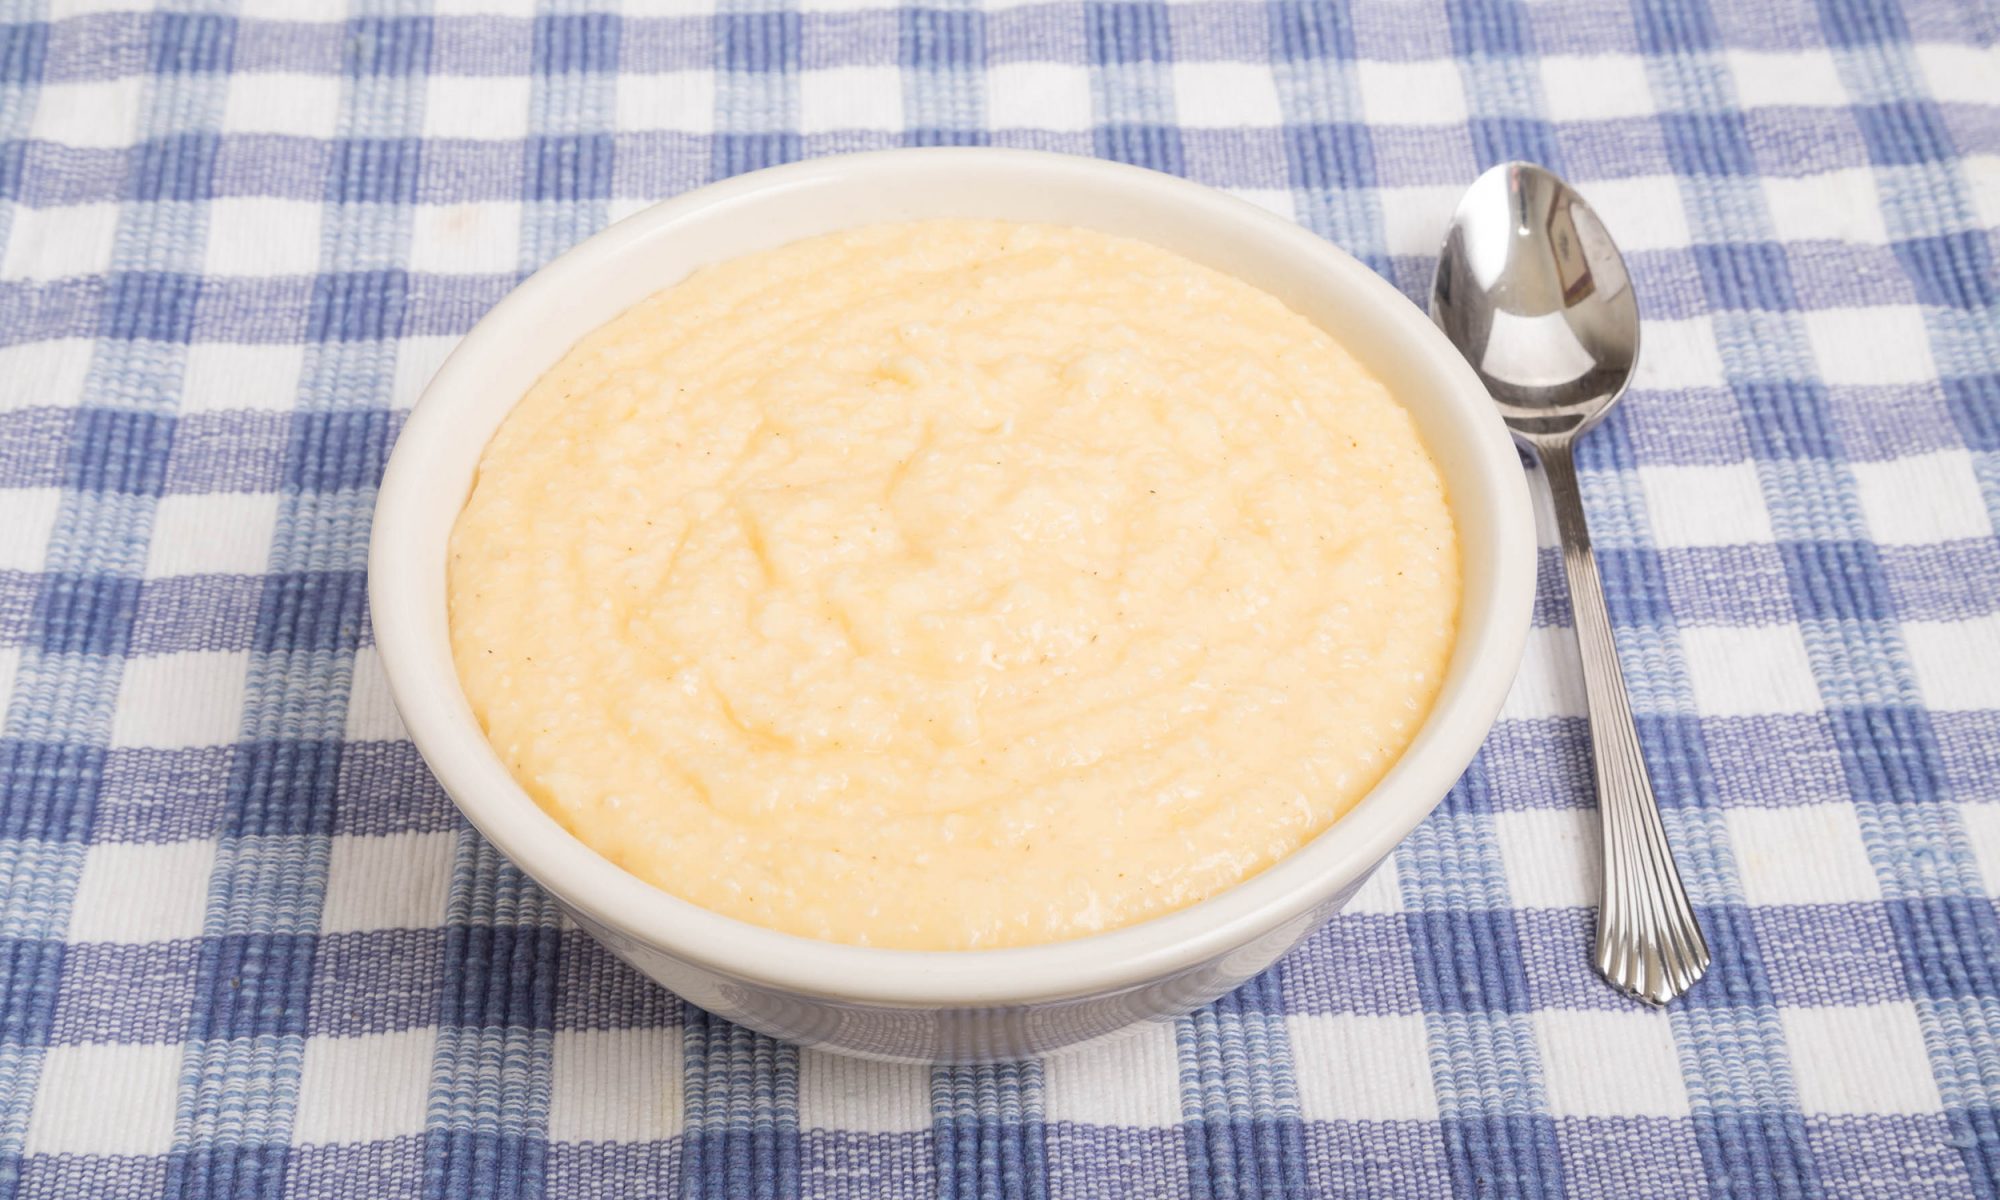 EC: What's the Difference Between Kinds of Grits?